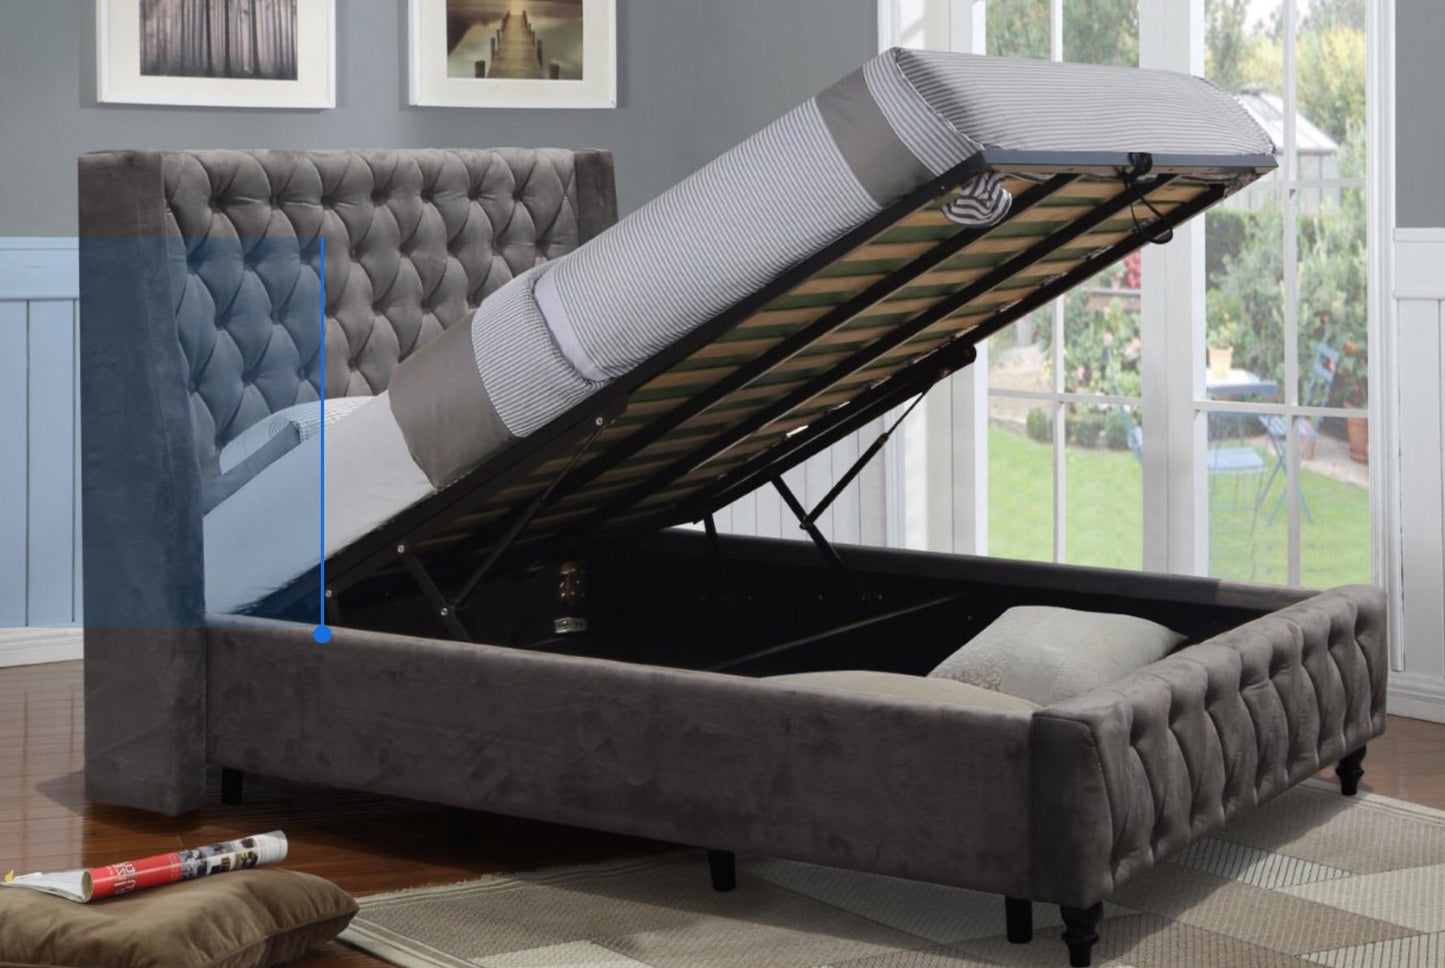 Jenkins Storage Bed (Gas Lift) with wings in stock was €850 reduced to clear